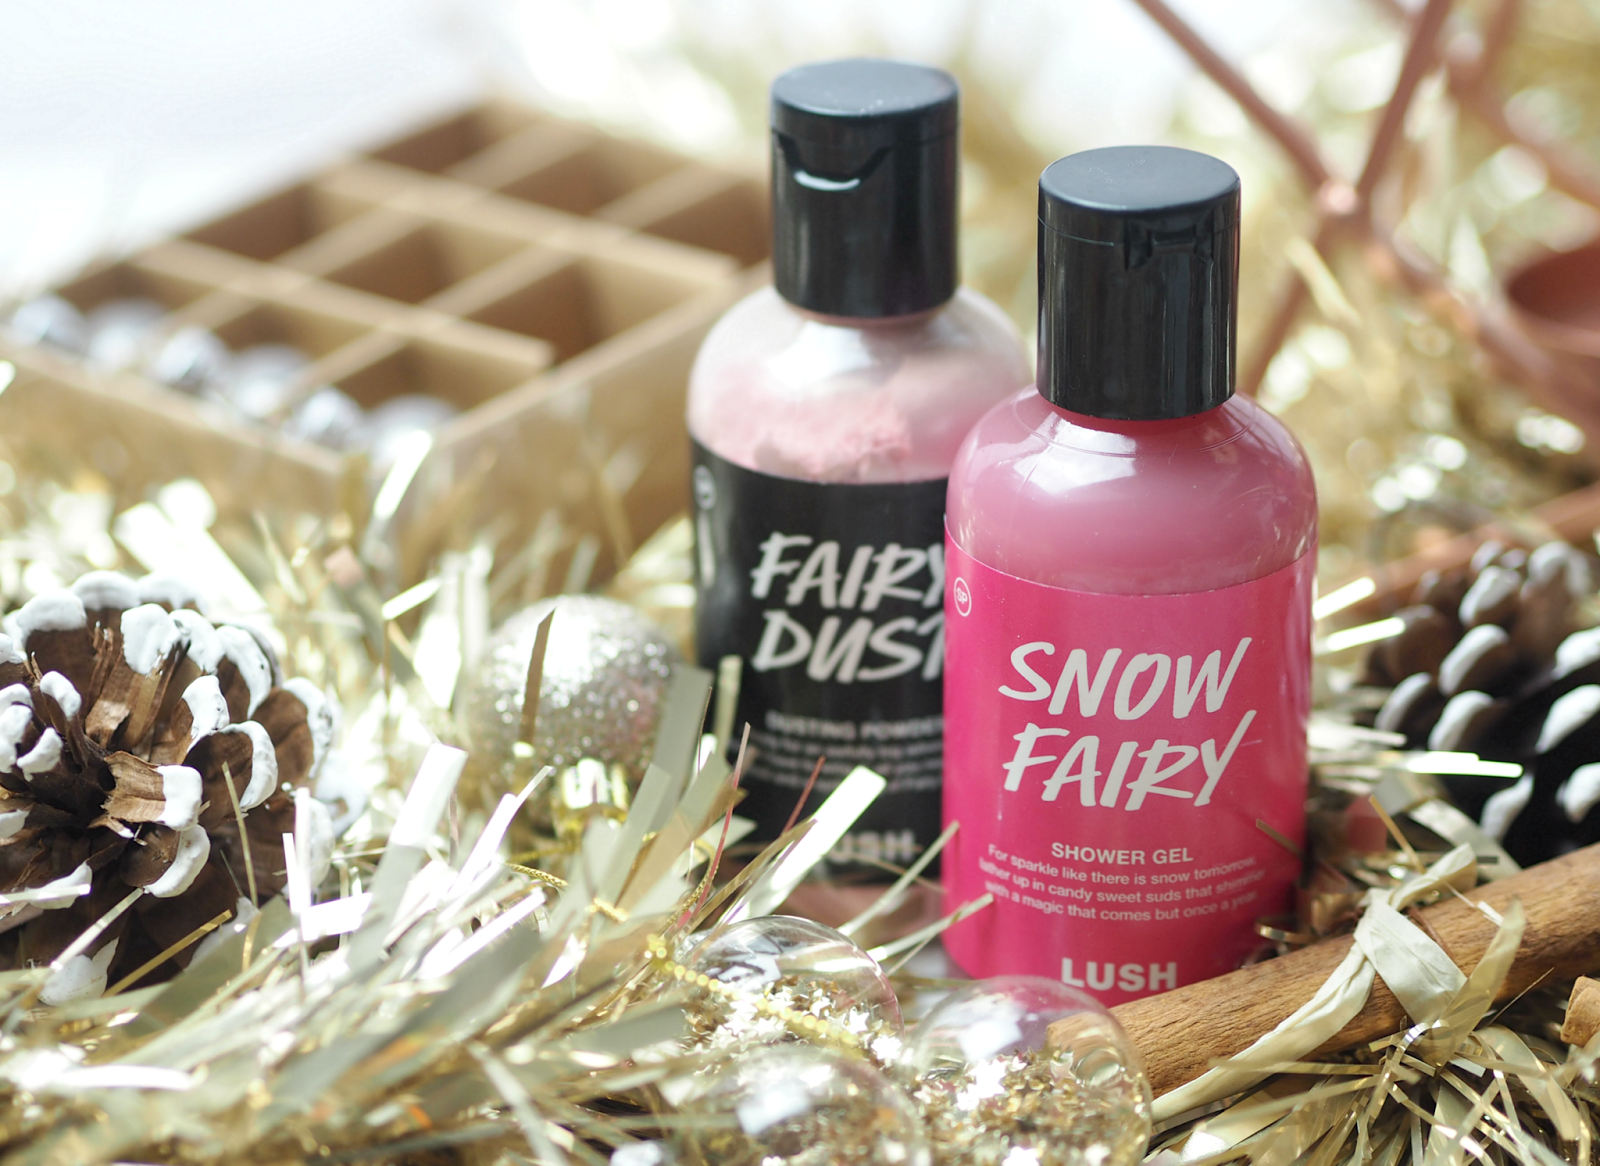 Festive Offerings From Lush That Your Sweet Tooth Will Love (It's Not Christmas Without Snow Fairy)